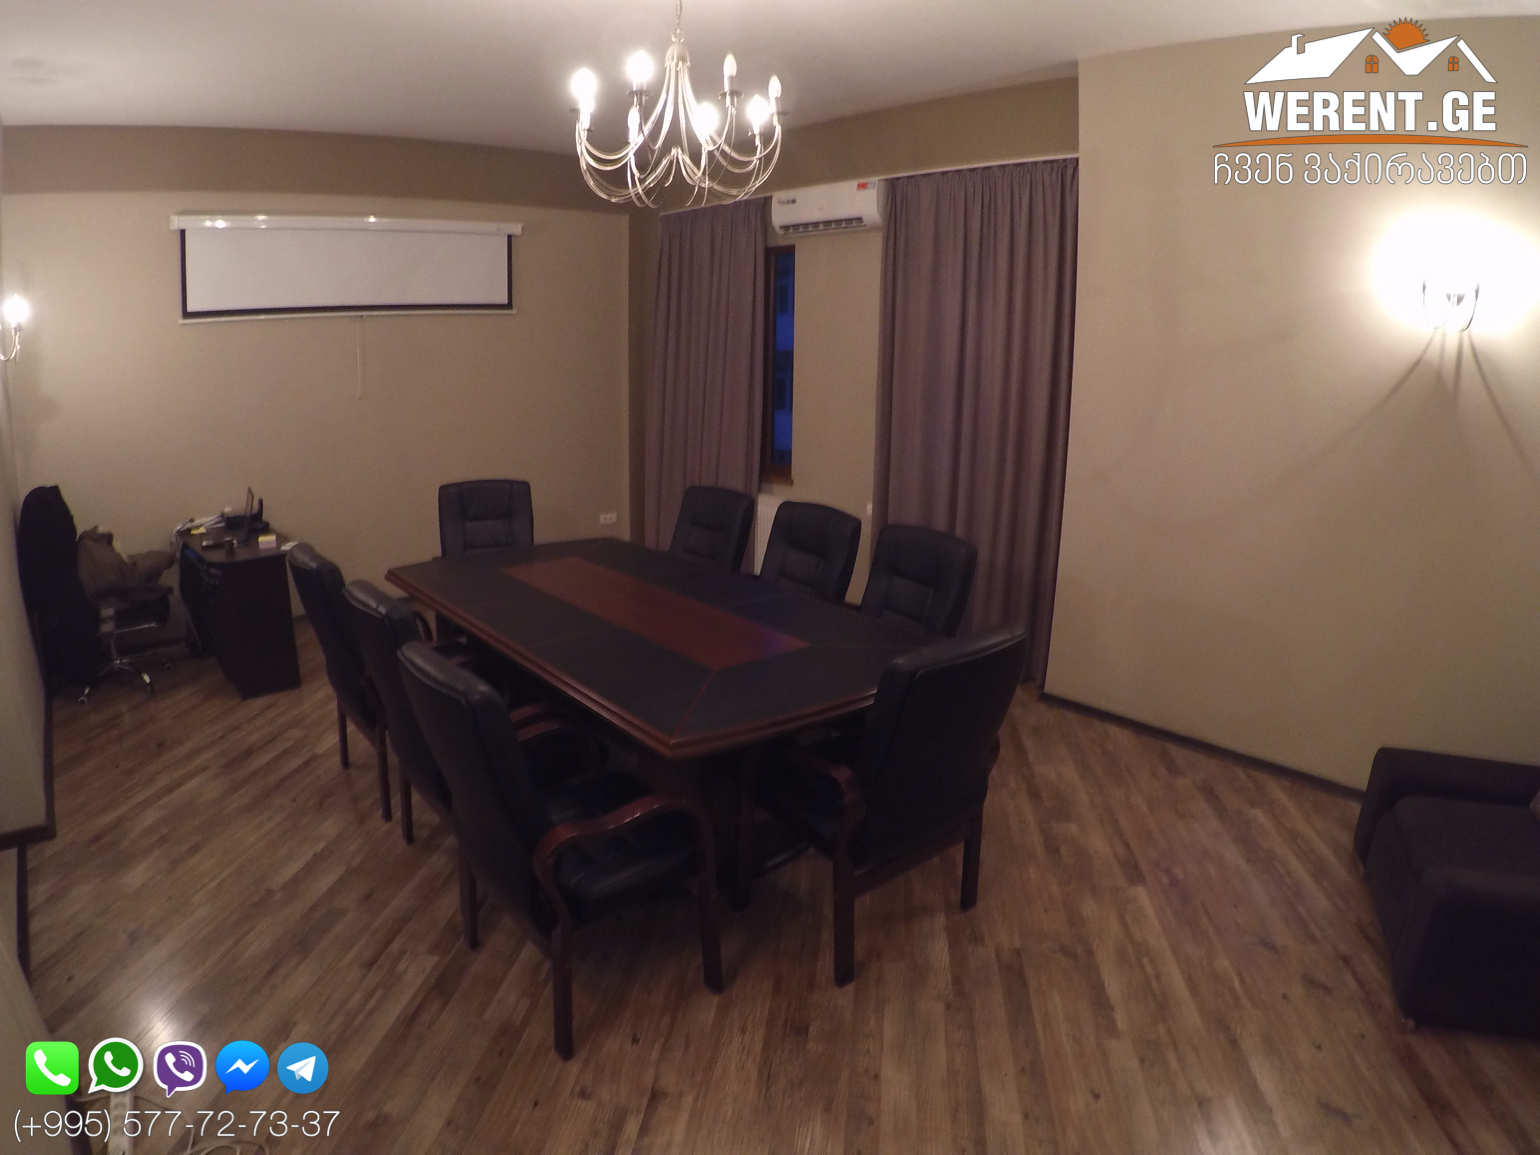 4-Room flat for Office Space For Rent with furniture at Kazbegi Ave, Saburtalo, Tbilisi